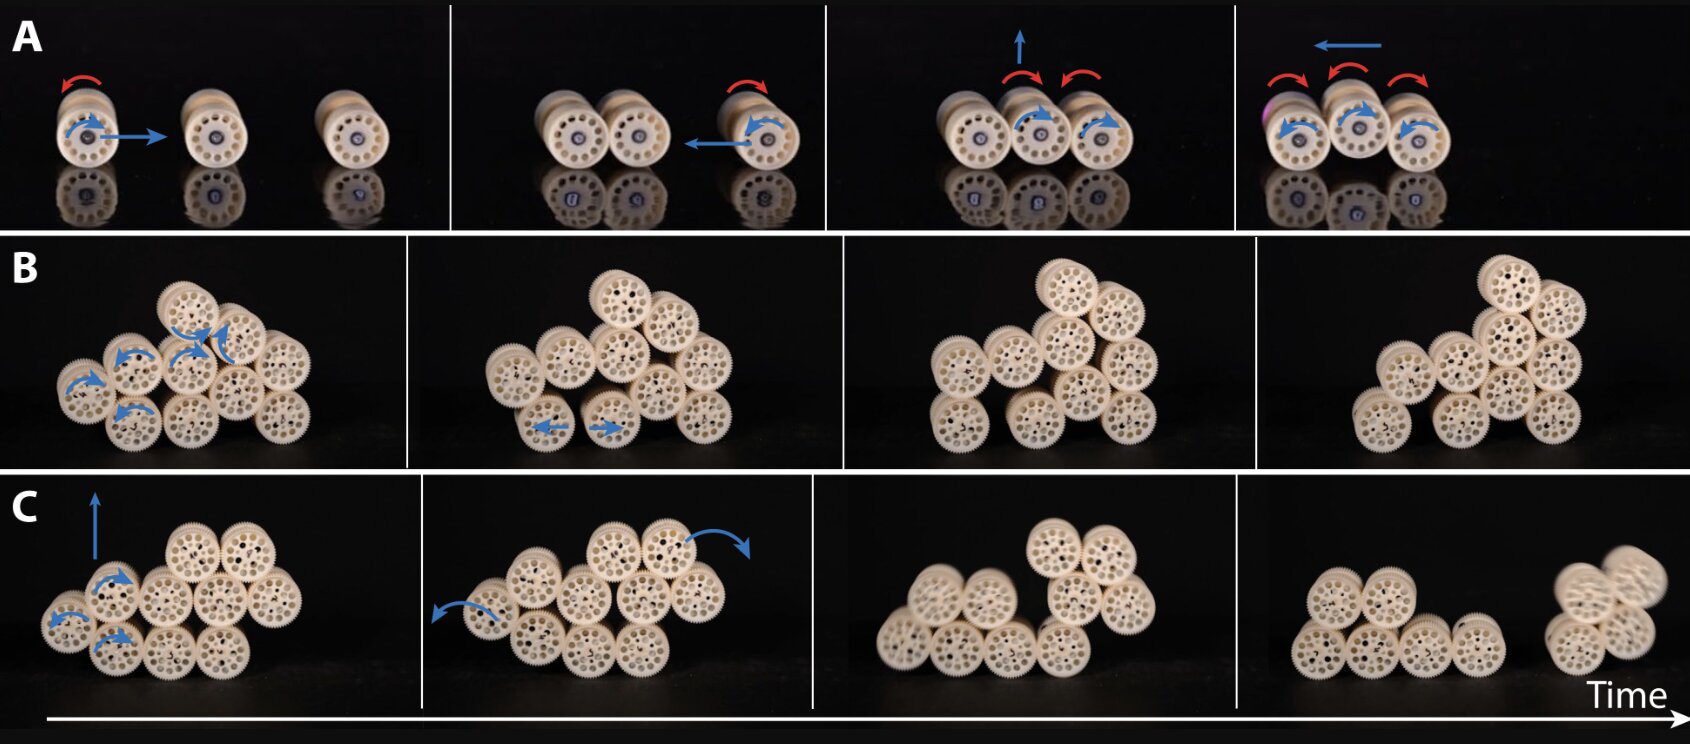 Self-organizing robotic aggregate design inspired by flowing and rigid behaviors of sandpiles